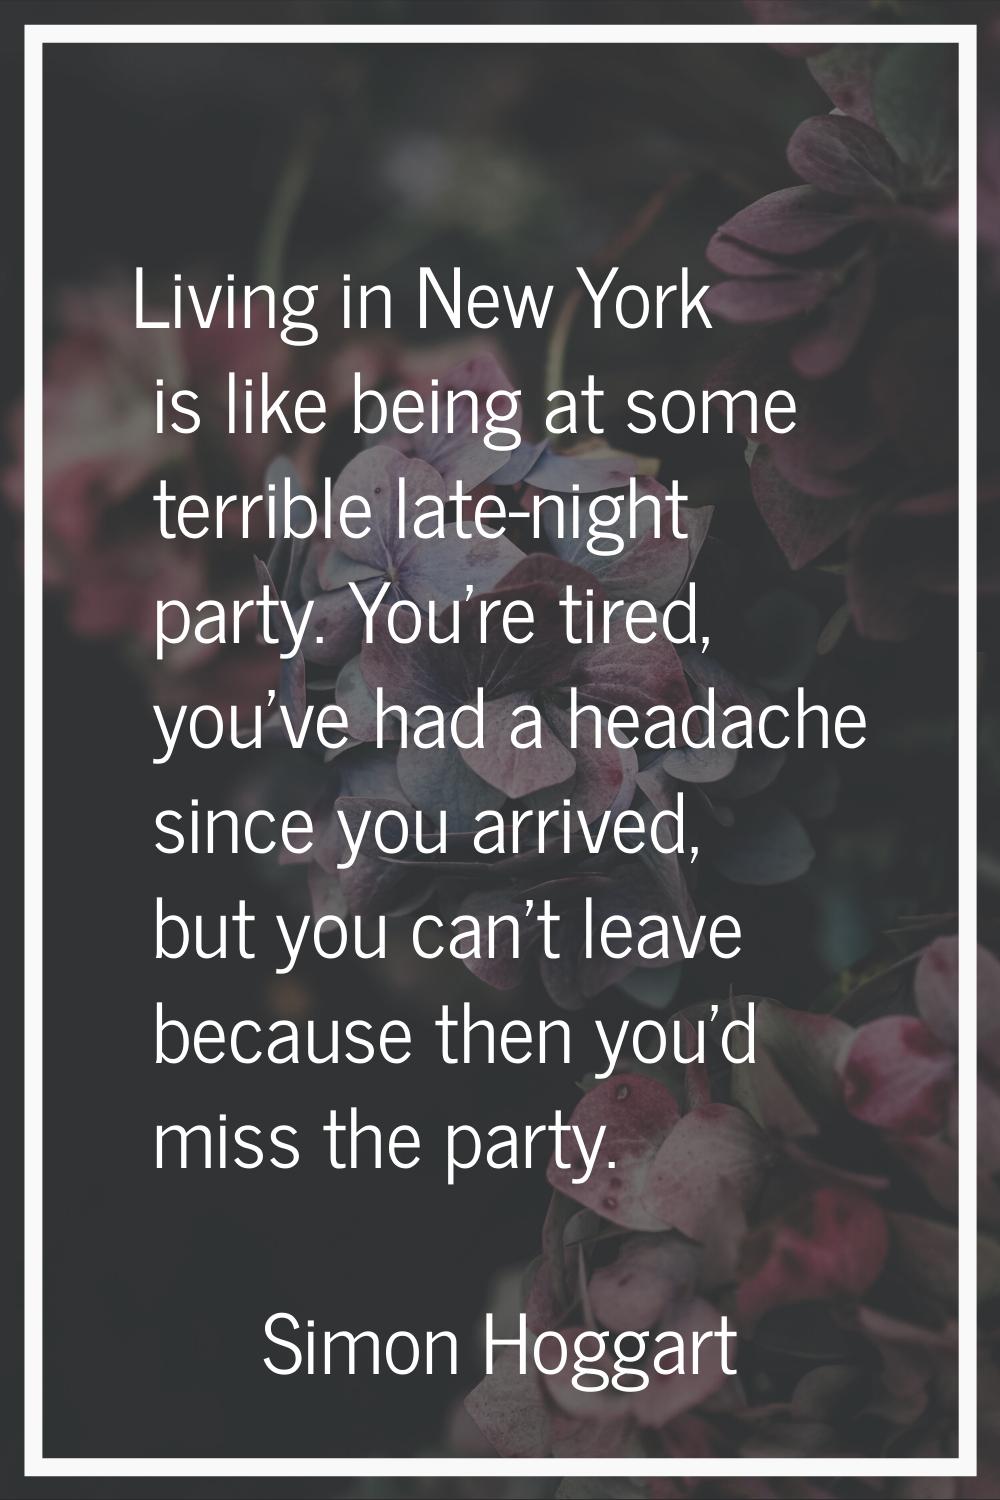 Living in New York is like being at some terrible late-night party. You're tired, you've had a head